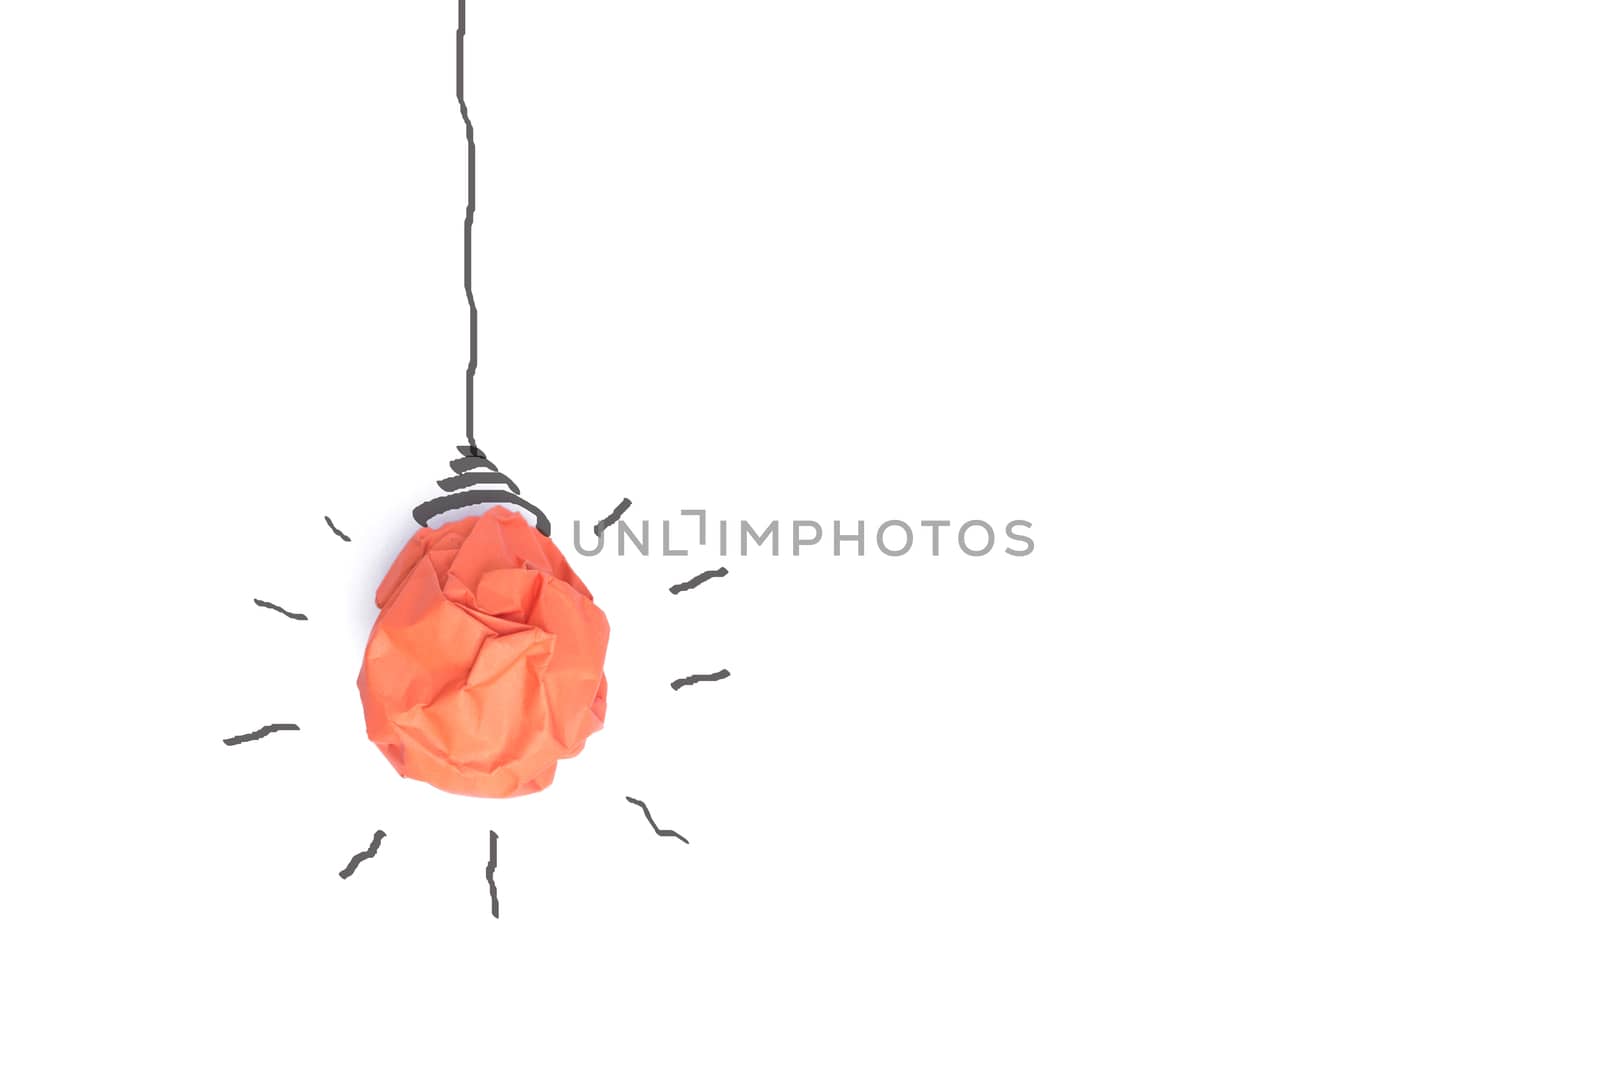 Concept idea with paper light bulb isolate on white background by kirisa99